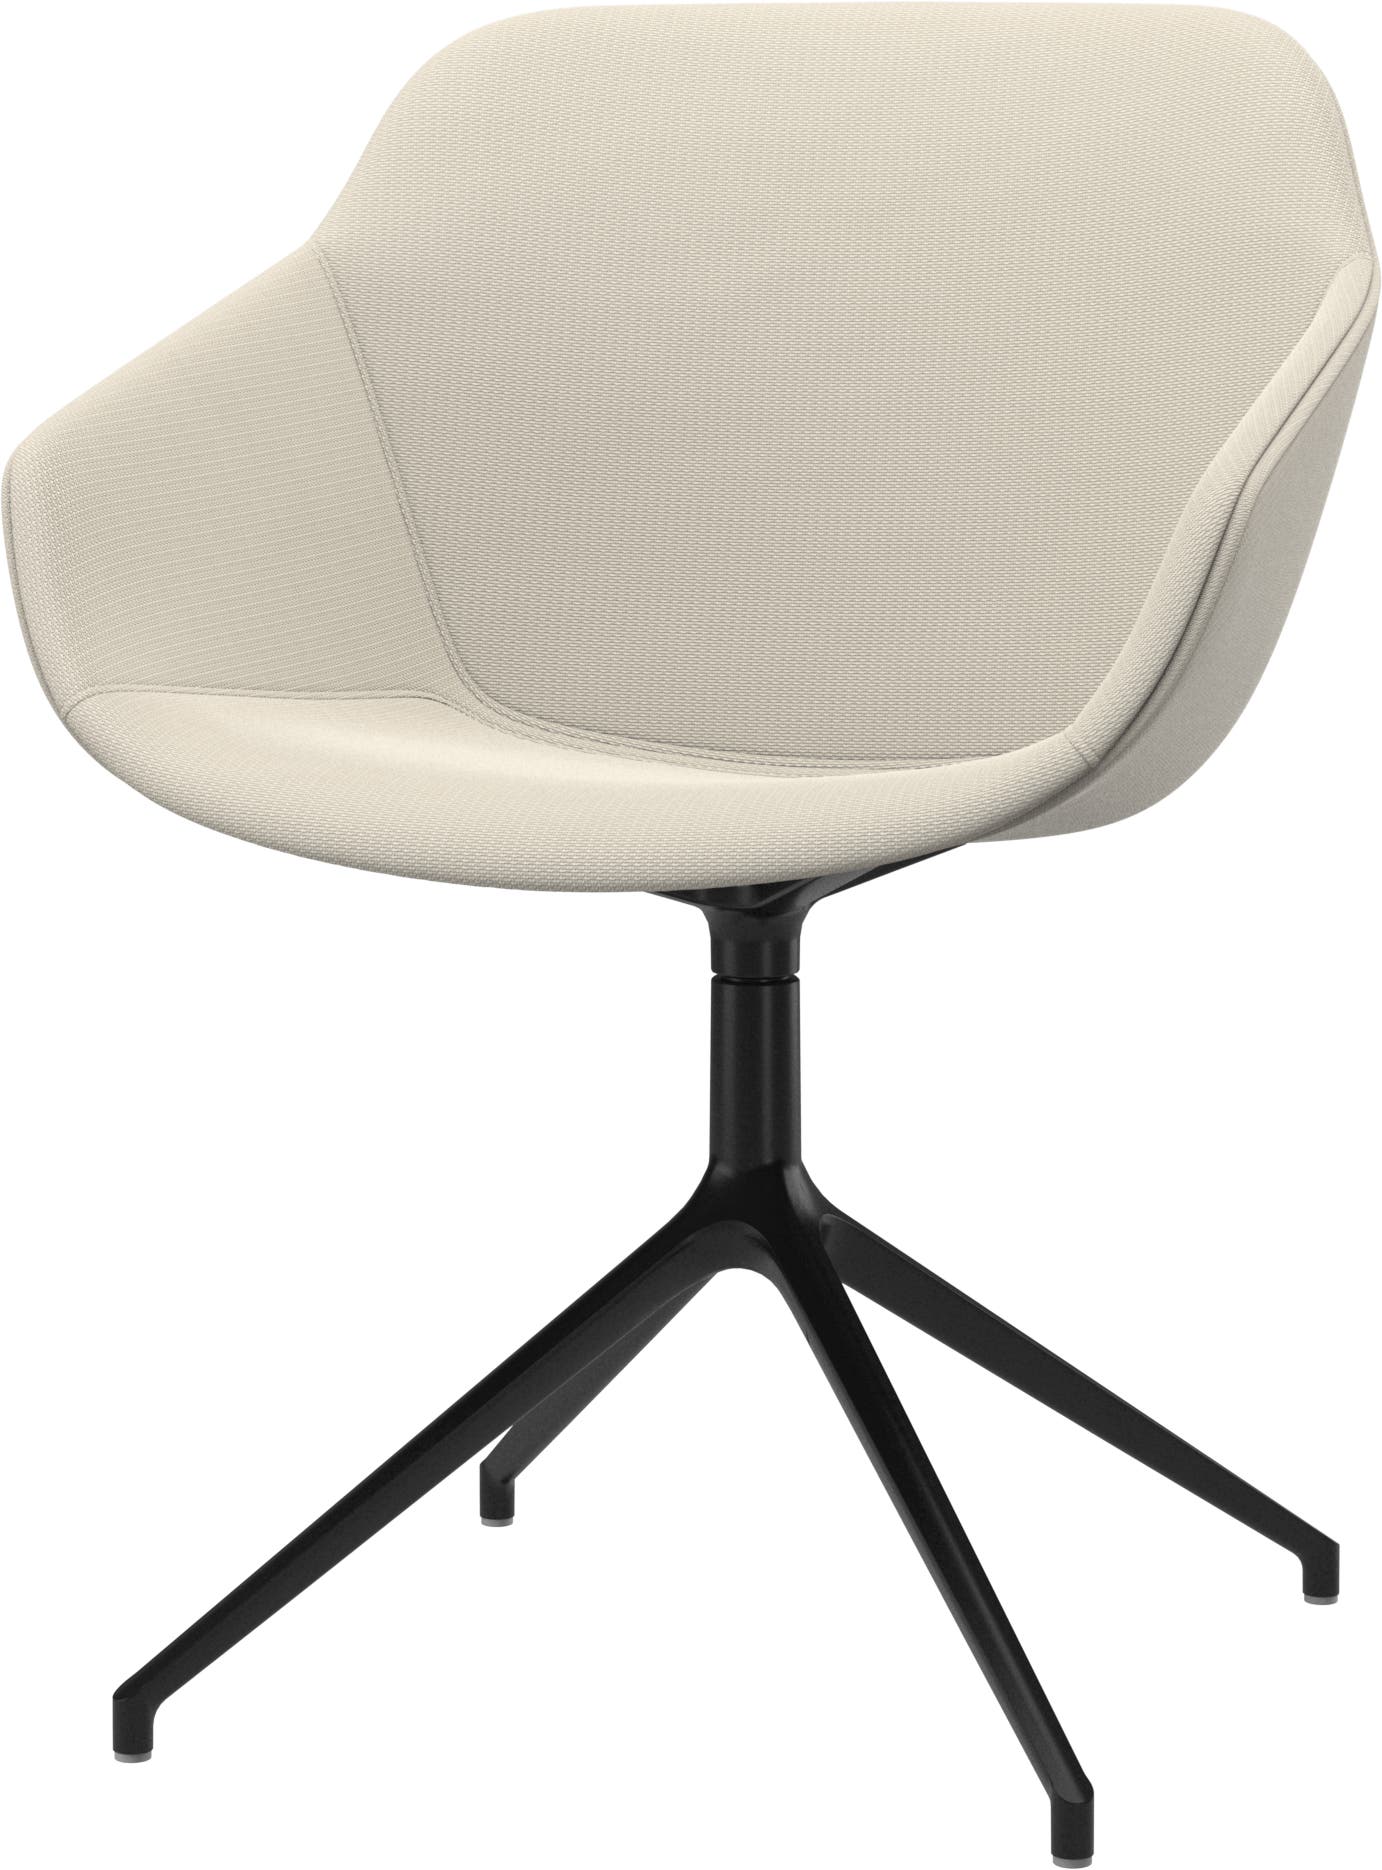 Vienna chair with swivel function